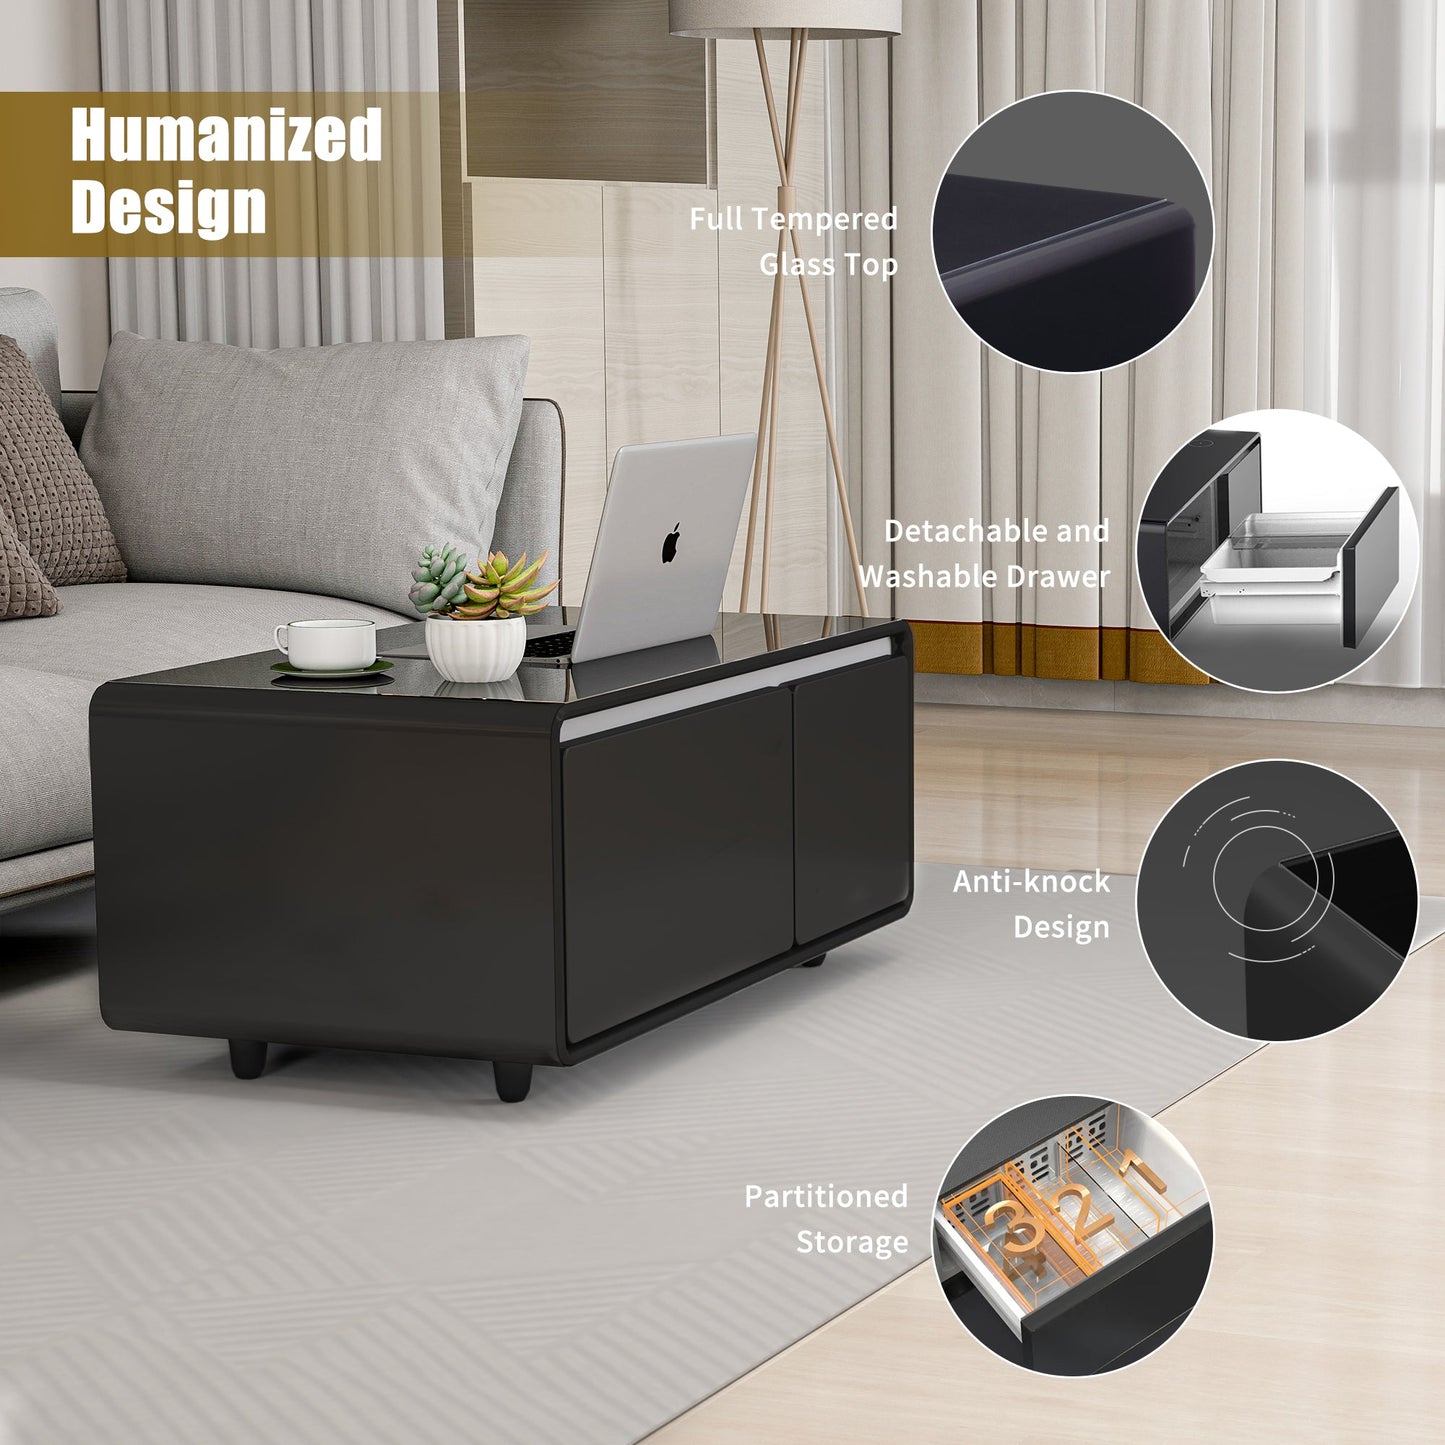 Modern Smart Coffee Table with Built-in Fridge, Wireless Charging, Power Socket, USB Interface, Outlet Protection, Mechanical Temperature Control and Ice Water Interface, Black